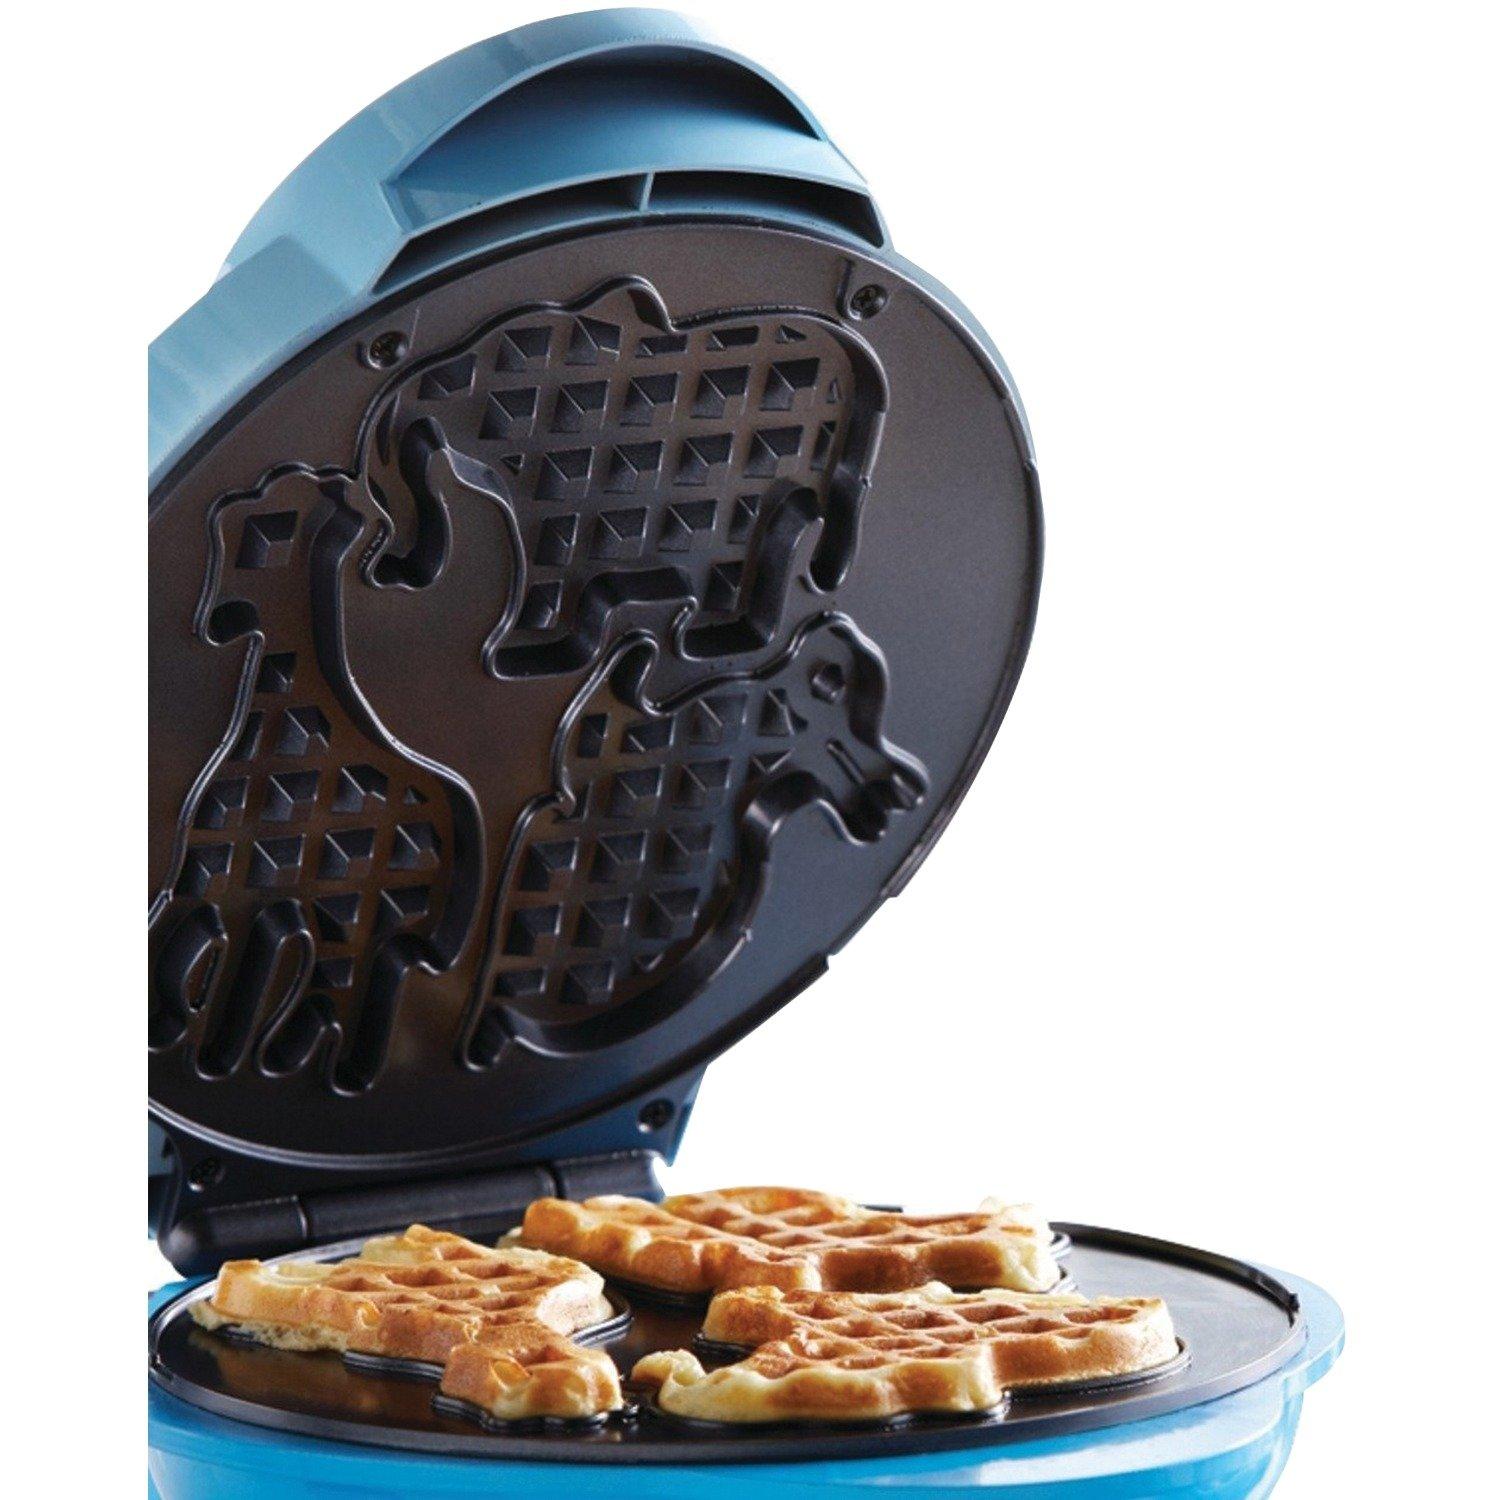 BRENTWOOD® APPLIANCES TS-253 NONSTICK ELECTRIC FOOD MAKER (ANIMAL-SHAPES WAFFLE MAKER)